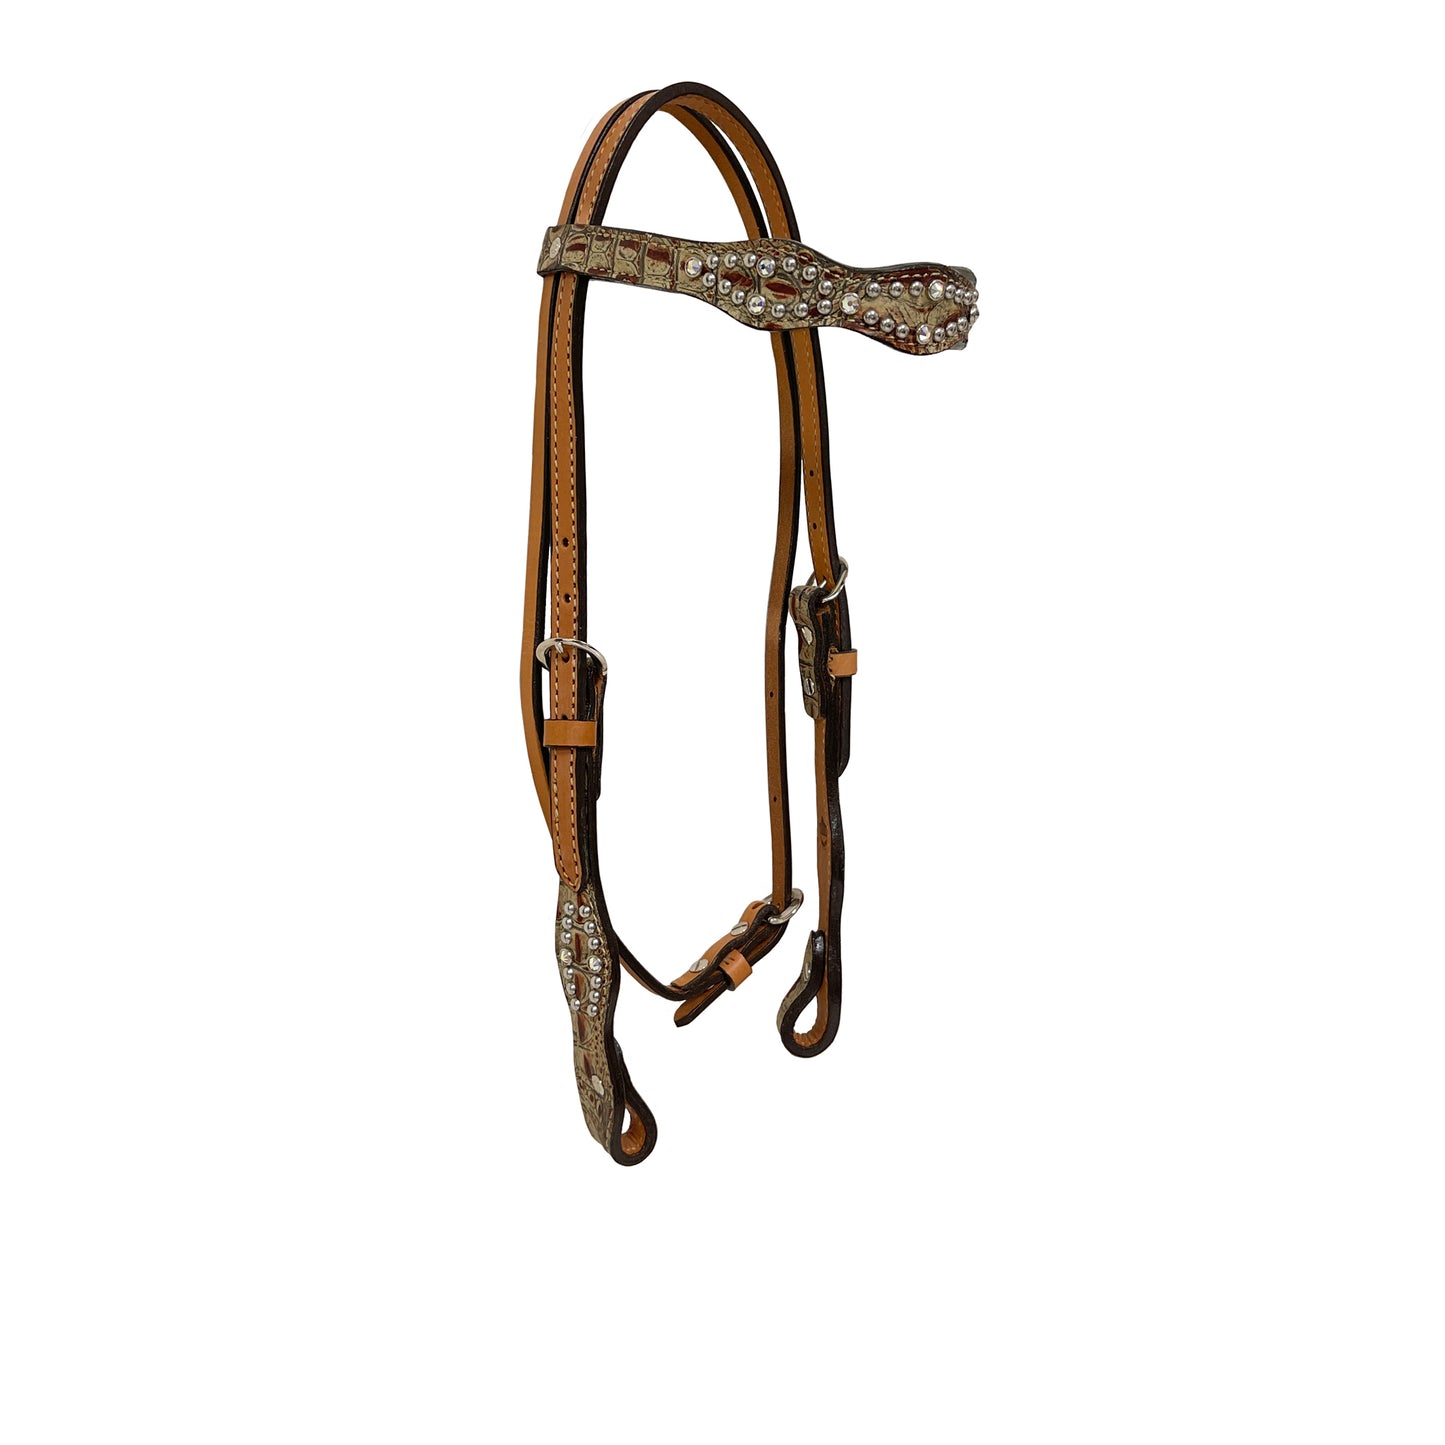 1/2" Scalloped browband headstall golden leather brown gator overlay with swavorski crystals and SS spots.